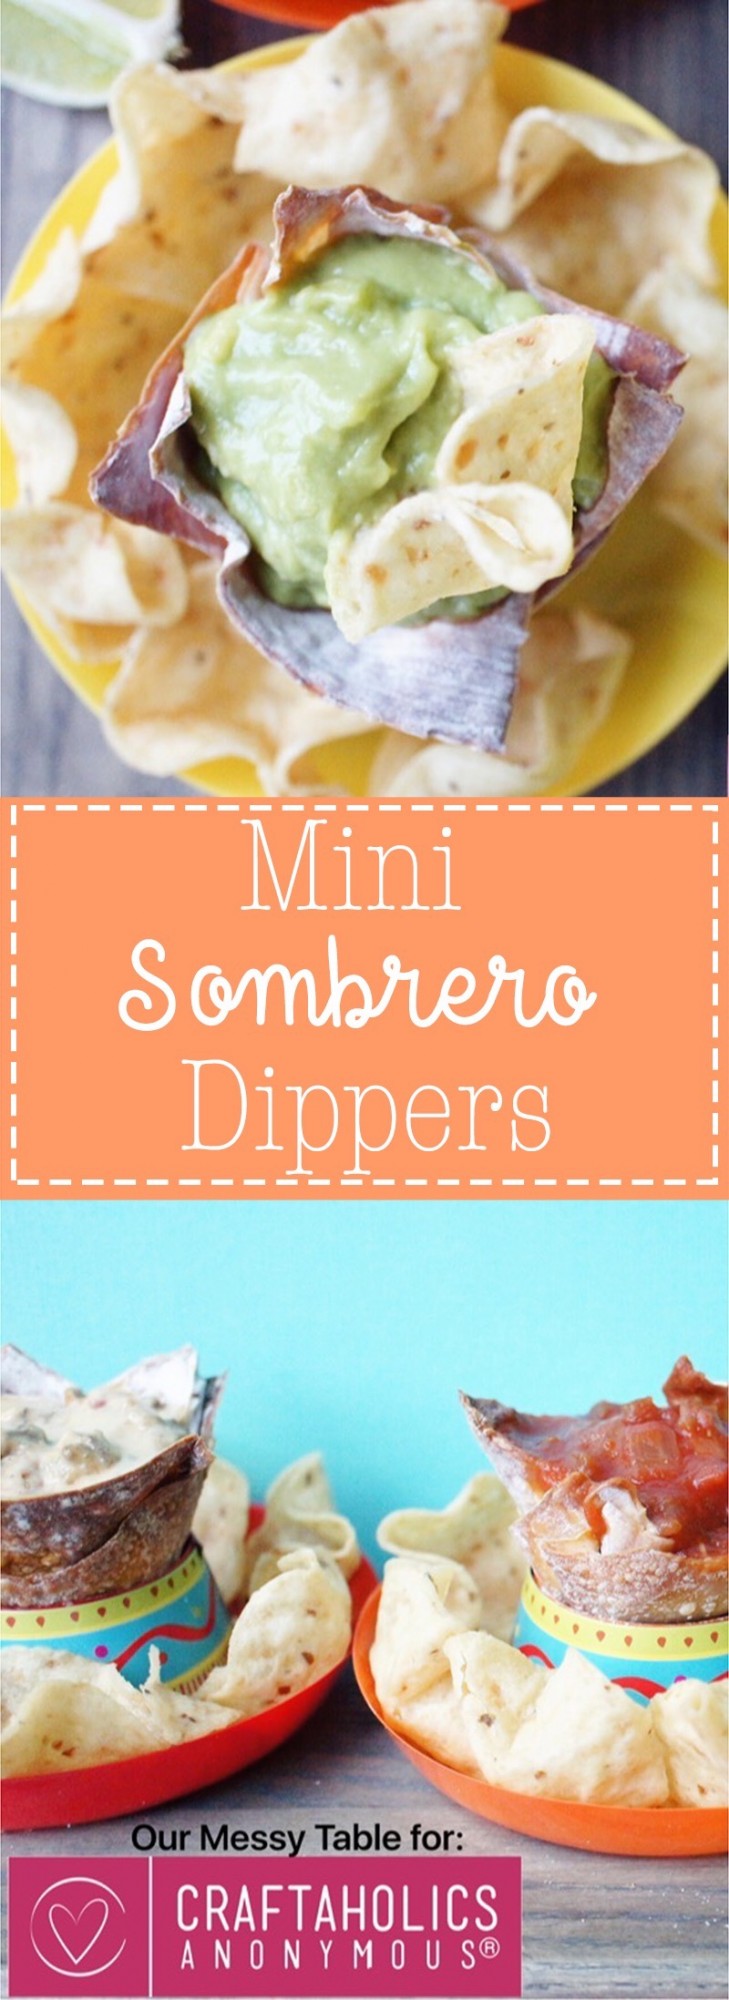 Add these fun Mini Sombrero Dippers to your next Mexican fiesta!